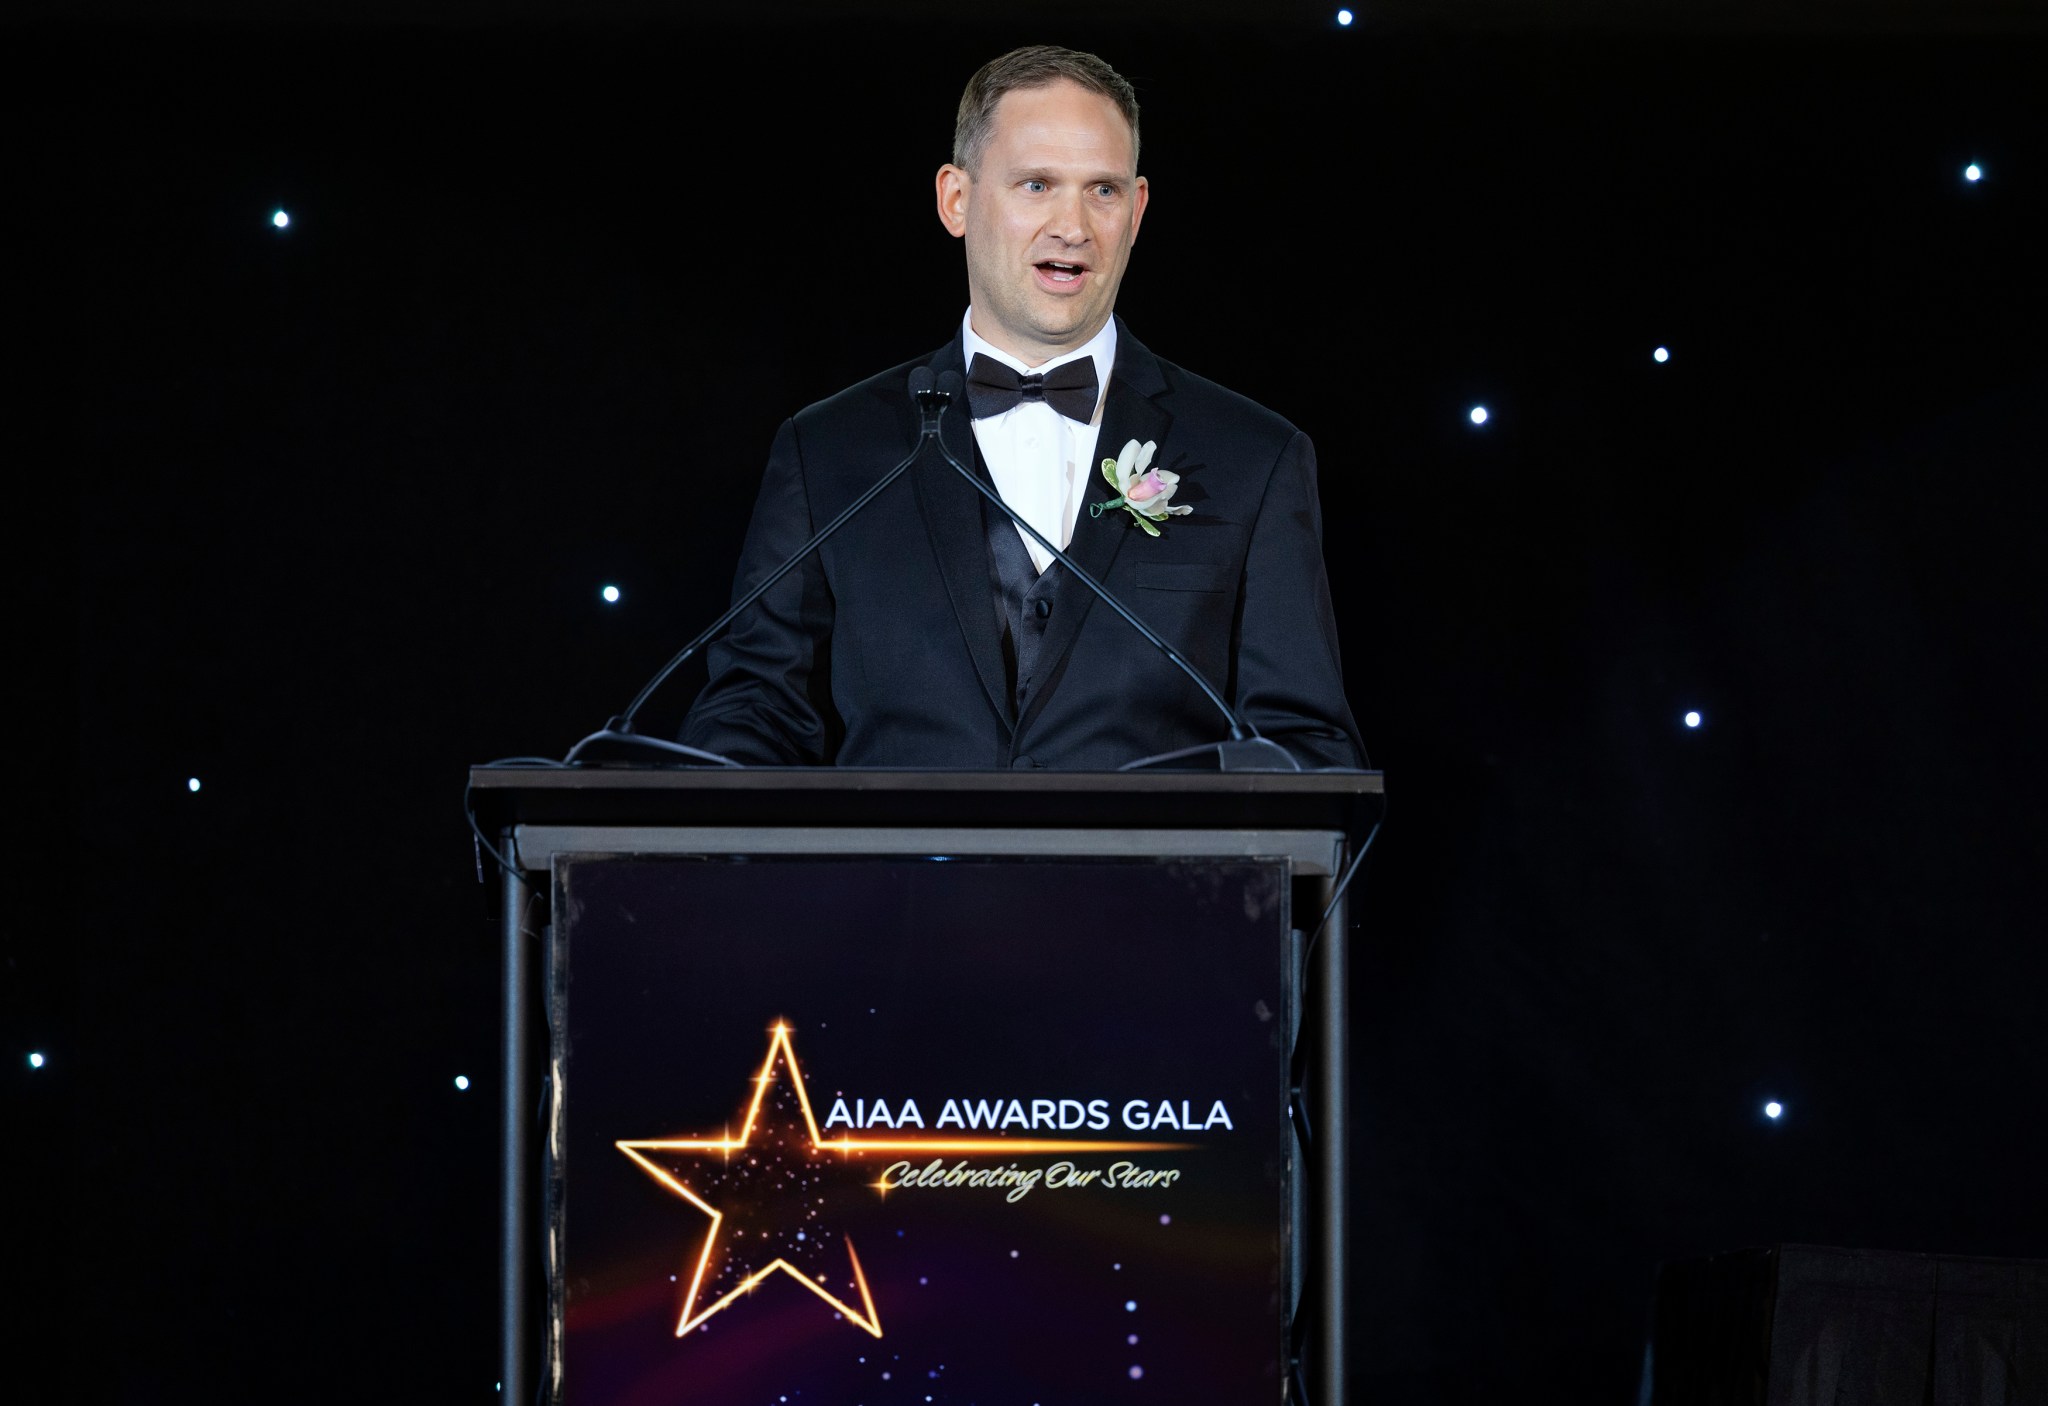 Paul Gradl delivers his acceptance speech as the recipient of the Engineer of the Year Award at the AIAA Awards Gala.